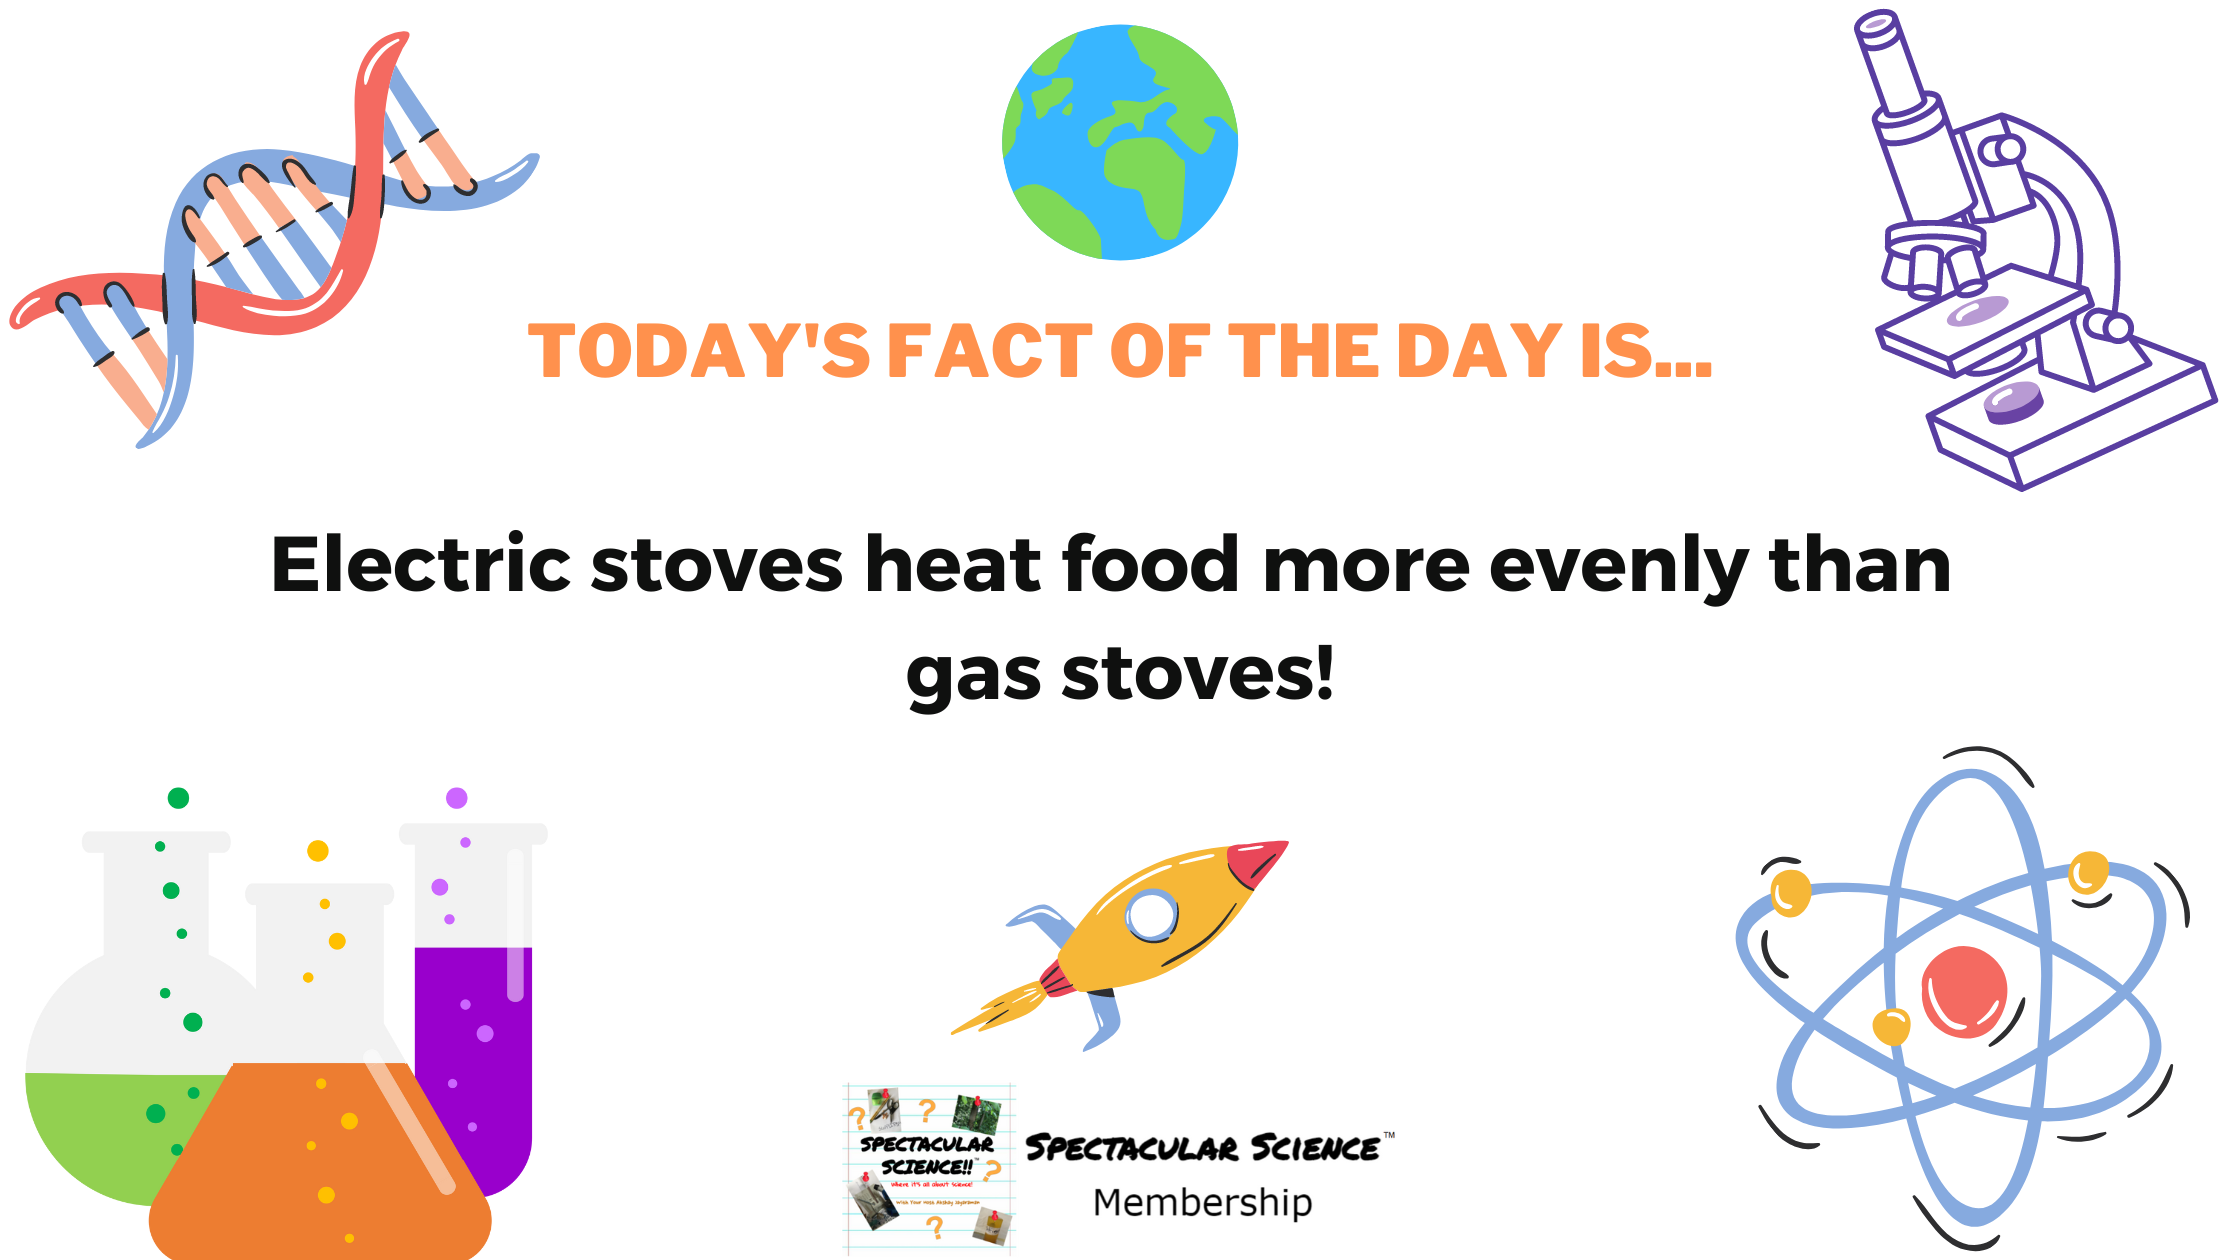 Fact of the Day Image July 24th